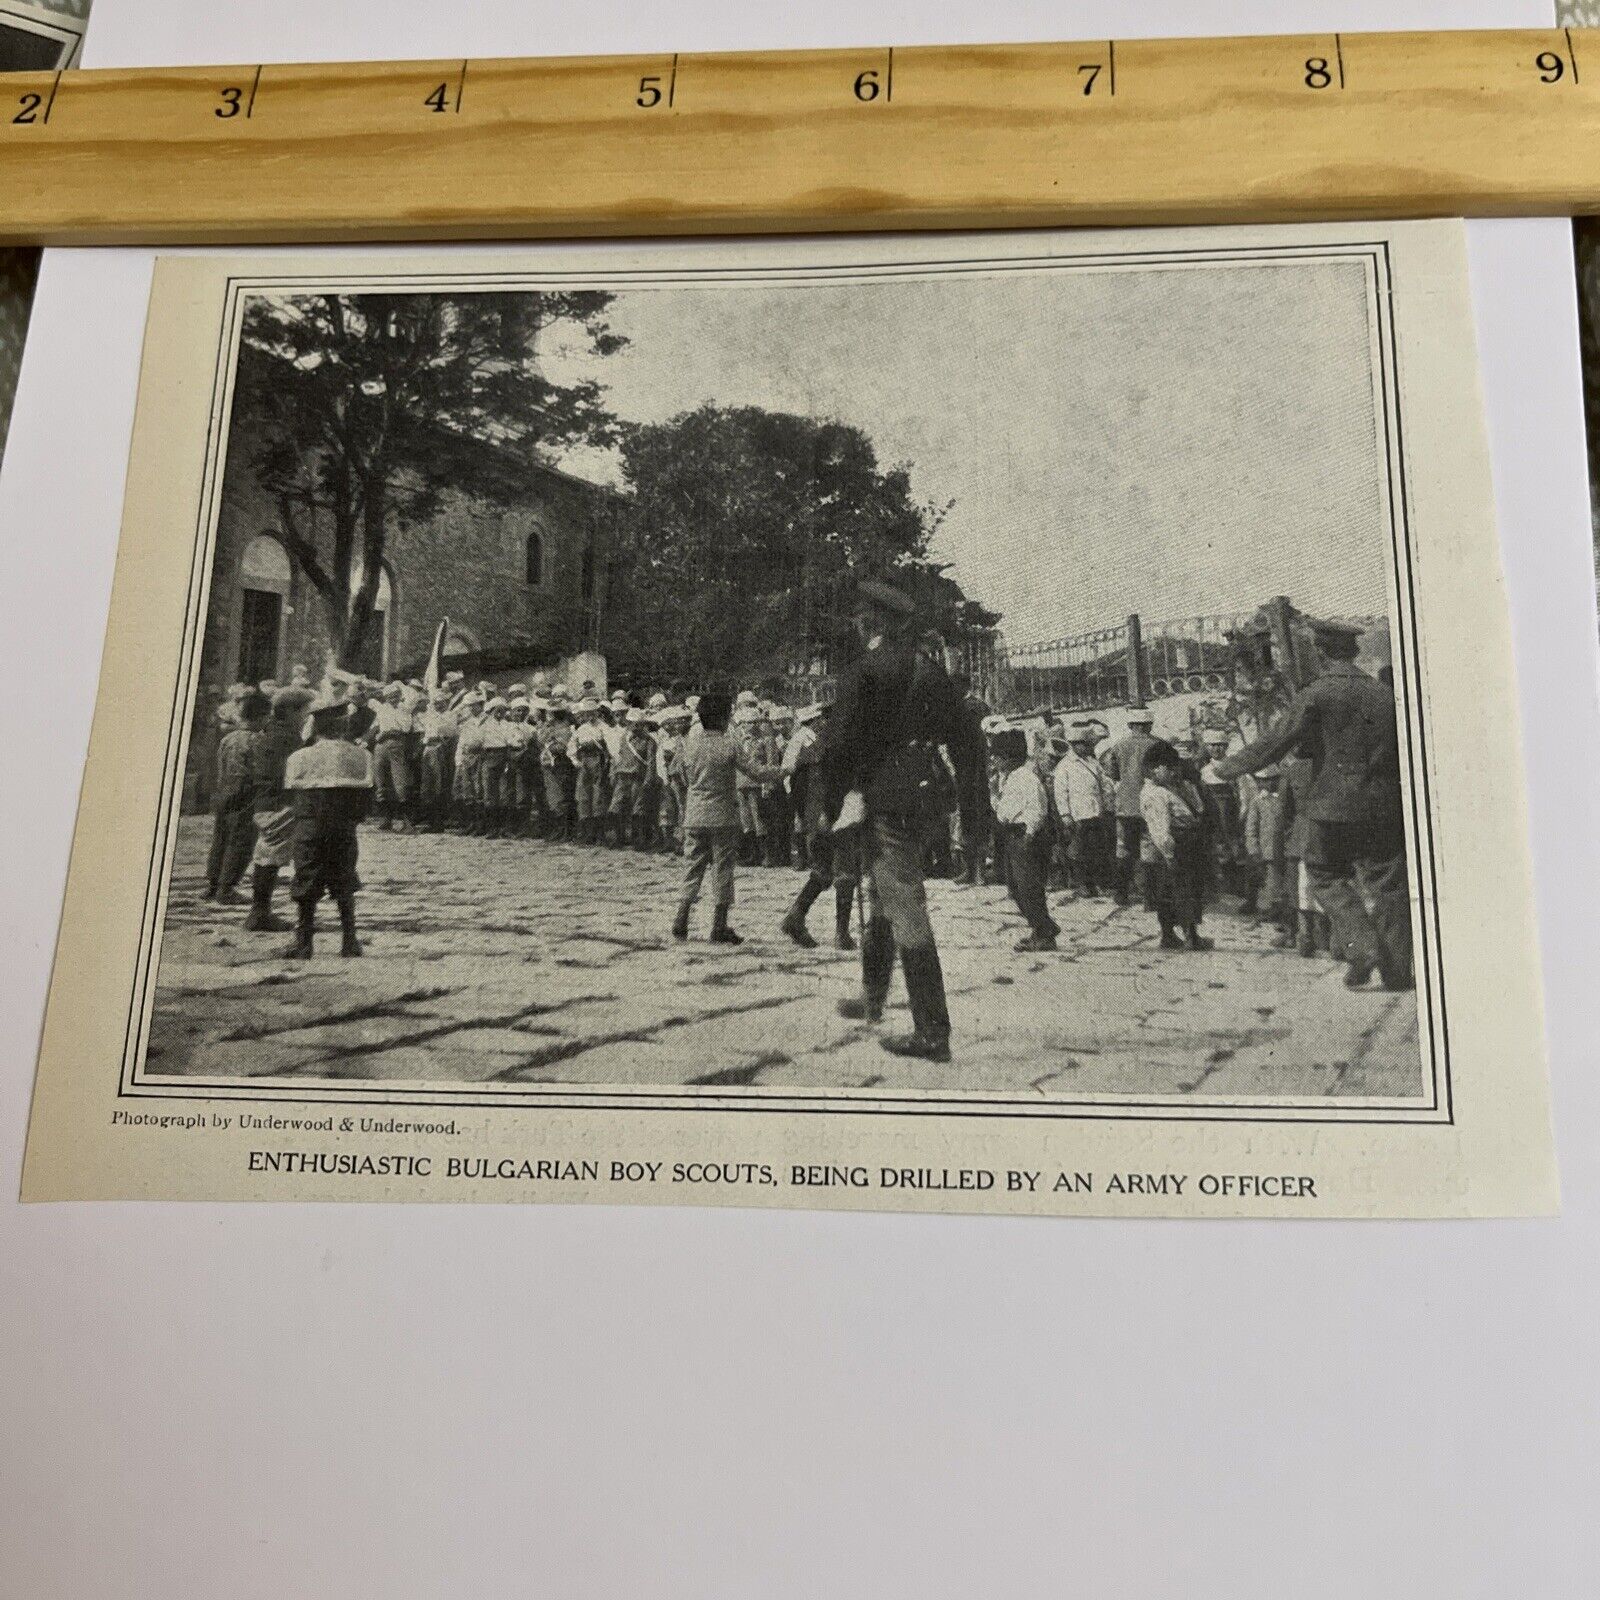 Antique 1912 Image Enthusiastic Bulgarian Boy Scouts, Being Drilled Army Officer